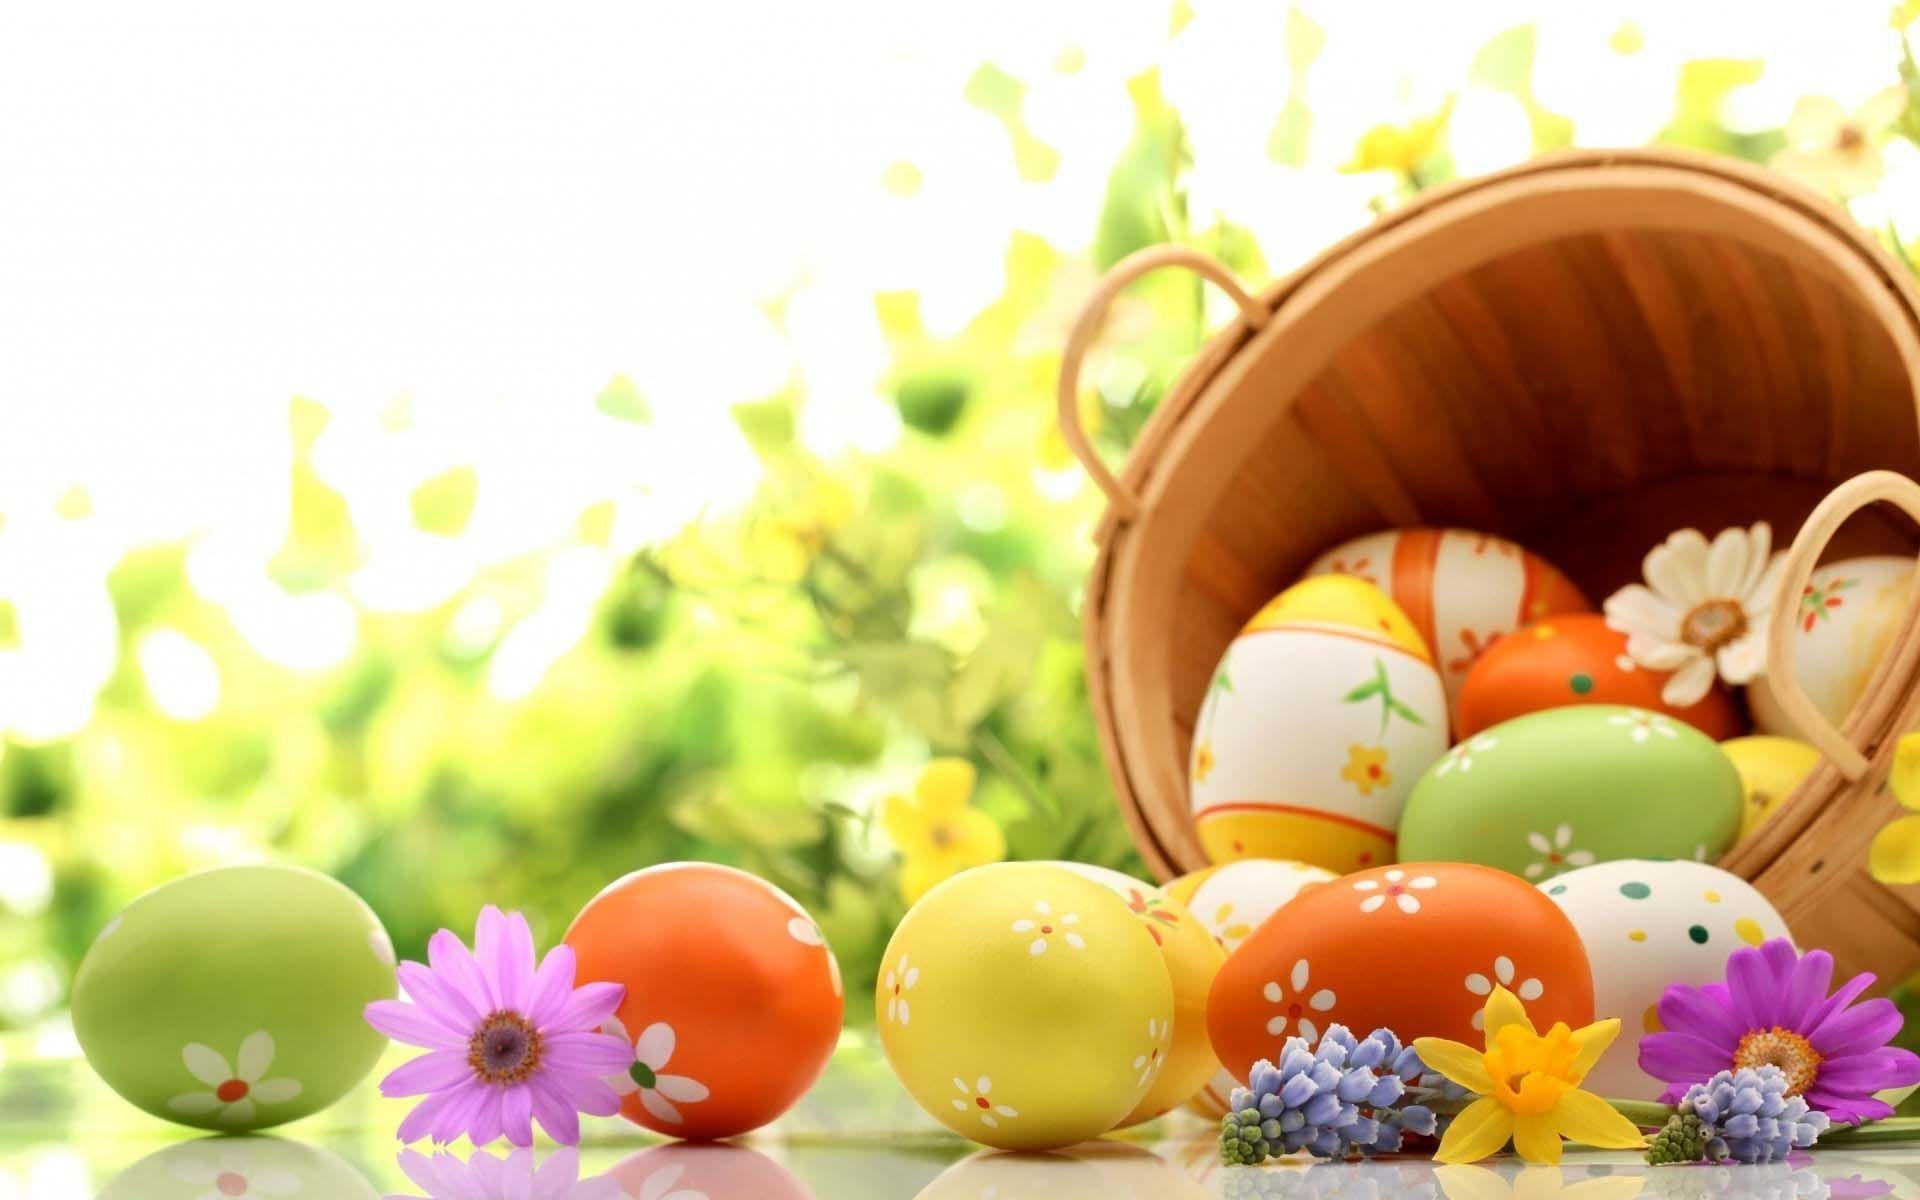 Easter Wallpaper HD download free colletion